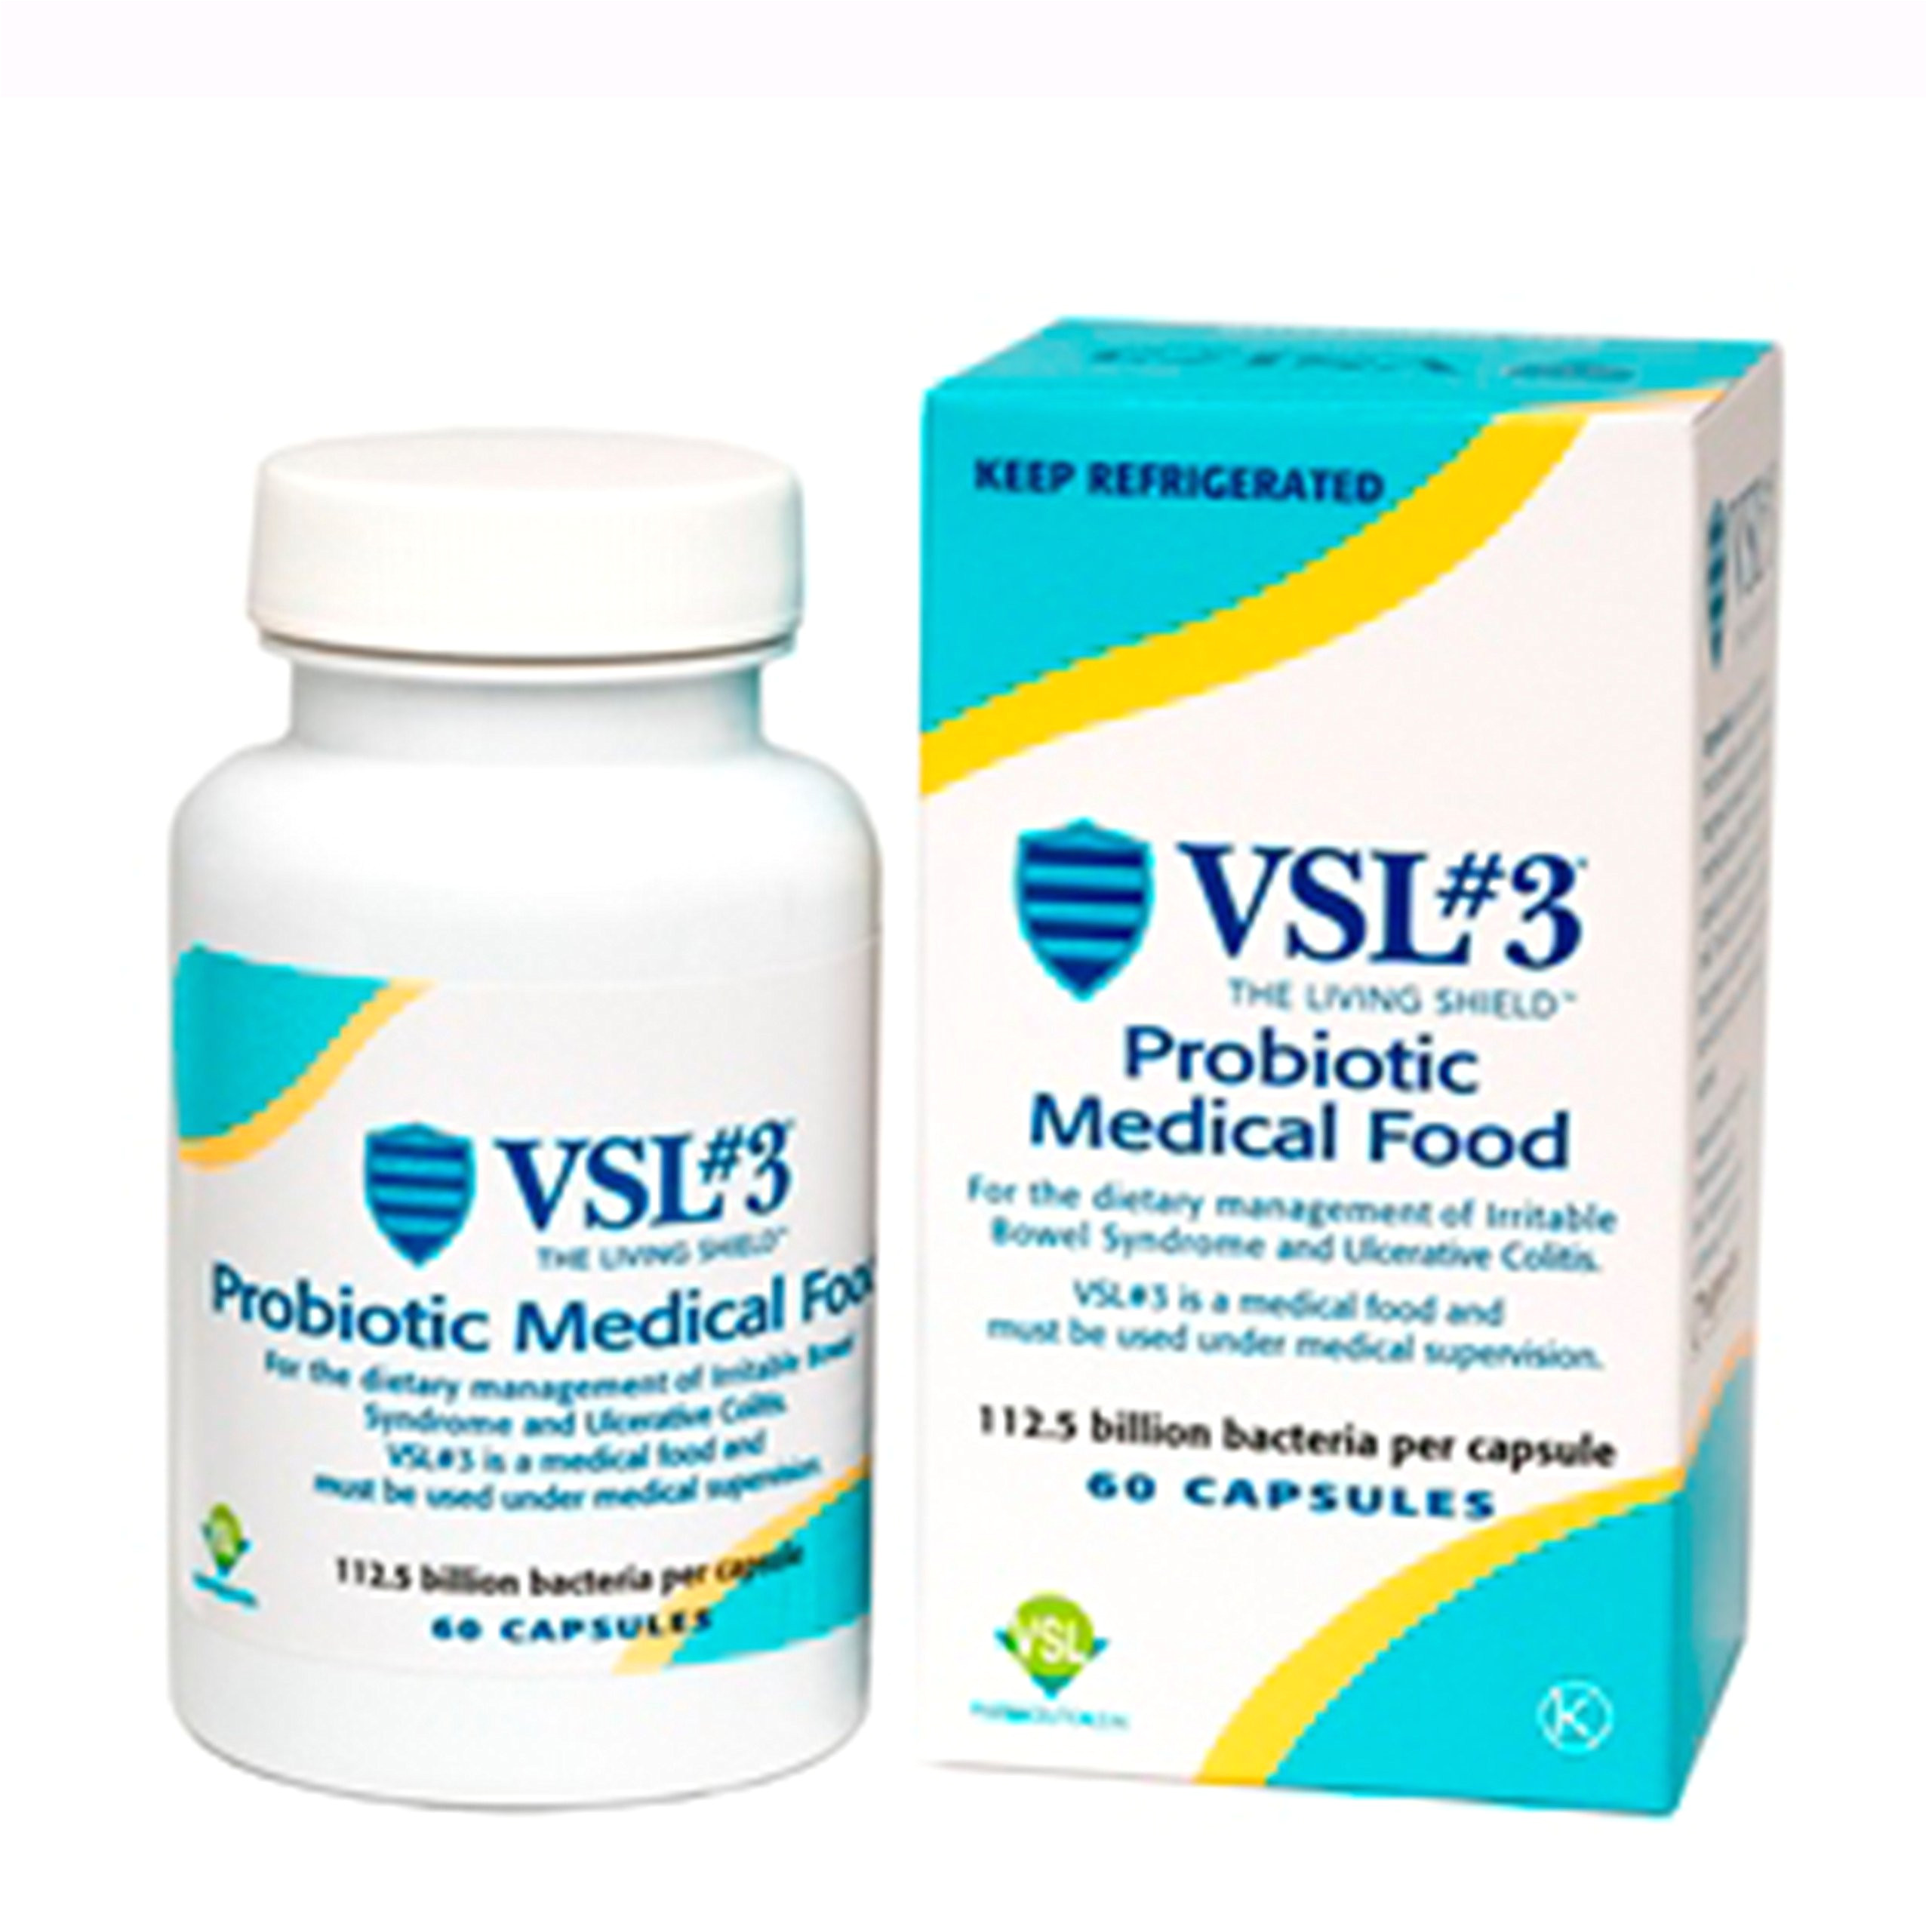 amazon com vsl 3 60 capsules shipped in a cooler with ice pack health personal care